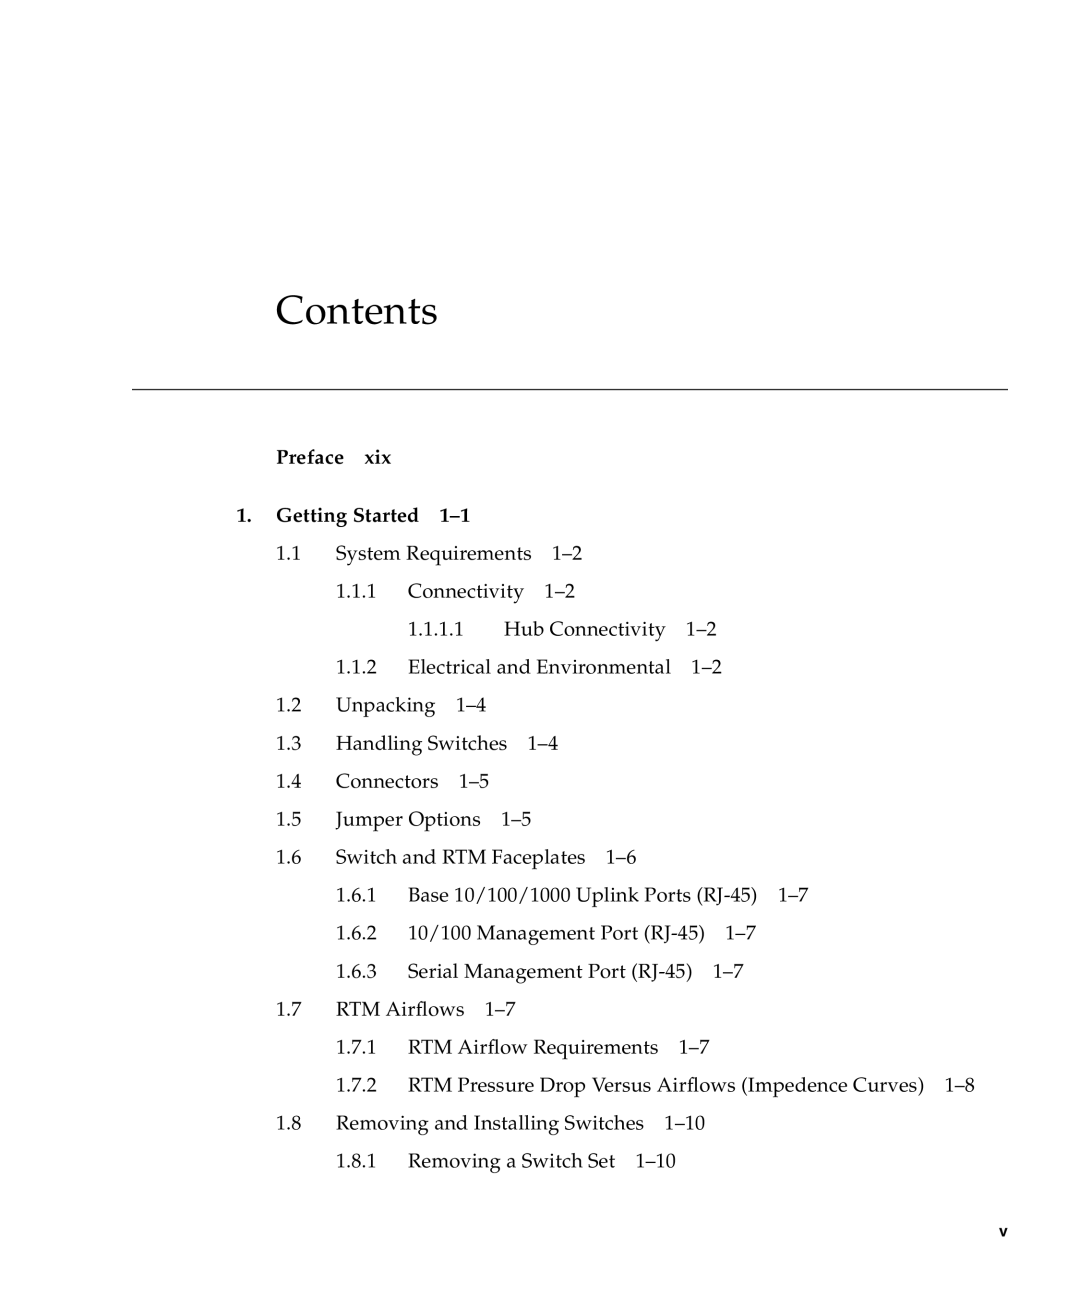 Sun Microsystems CP3240 manual Contents, Preface 1. Getting Started 